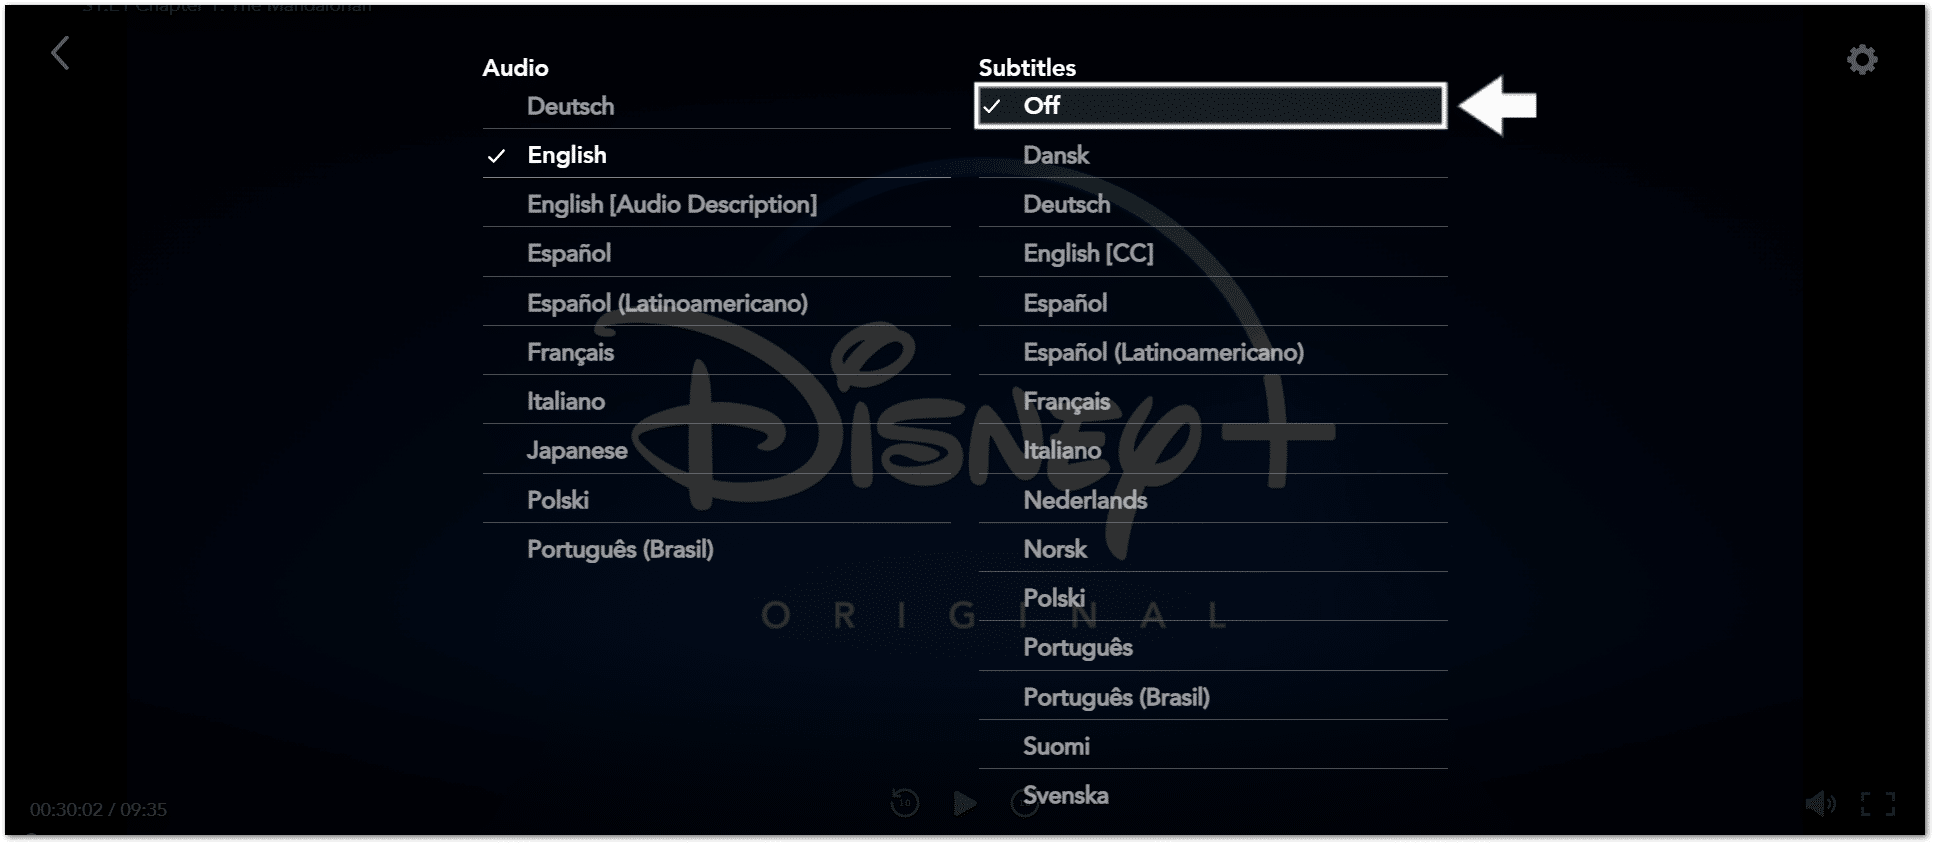 toggle the subtitles off and then on to fix Disney Plus subtitles or closed captions not working